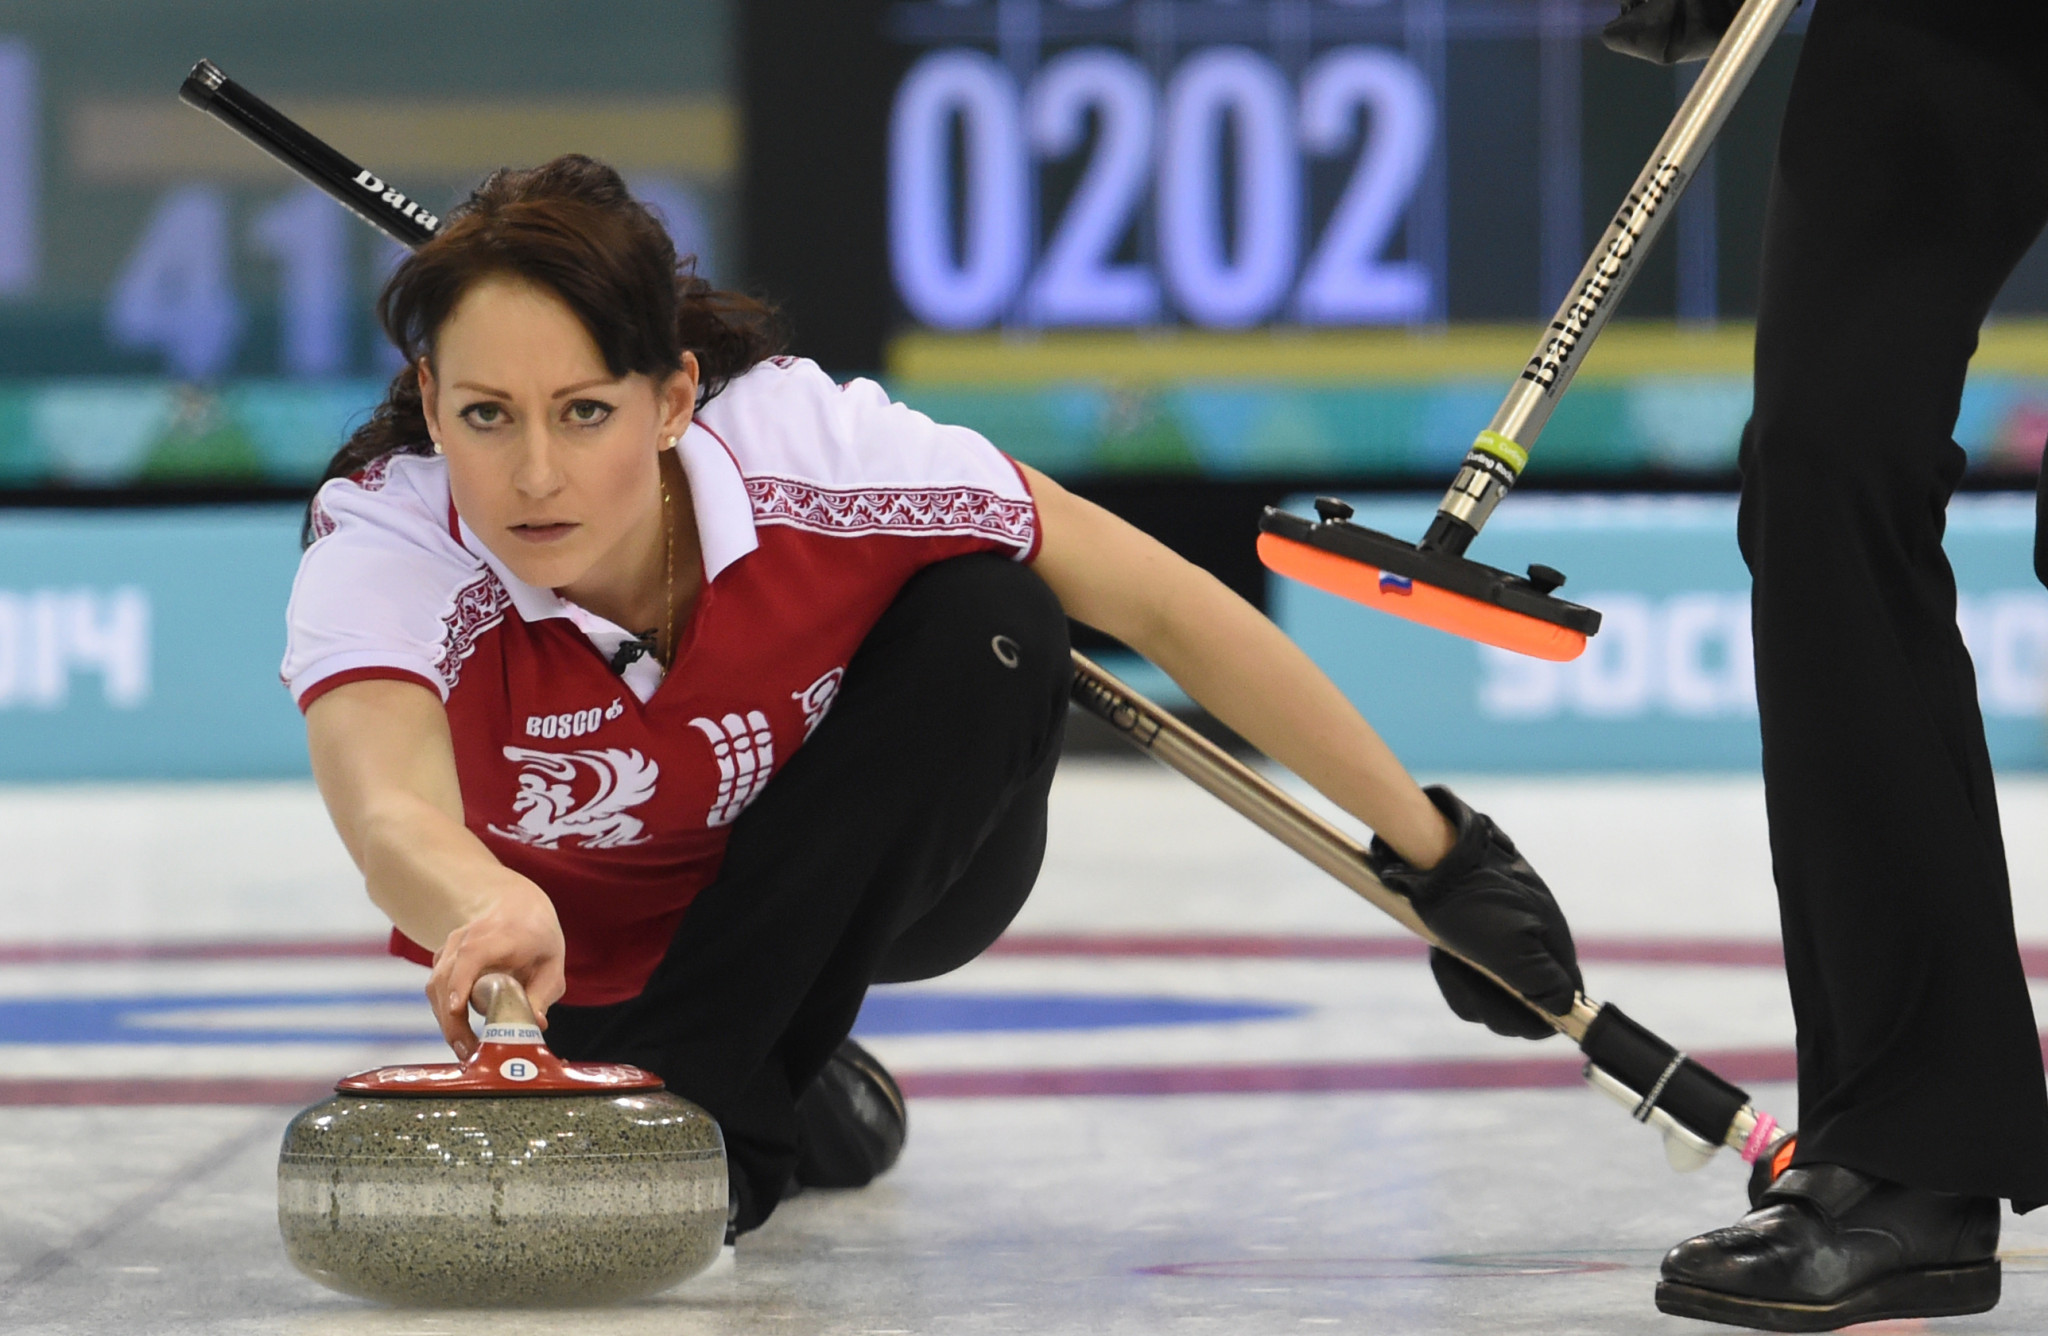 Russian curler implicated in "disappearing" positive drug tests before Sochi 2014